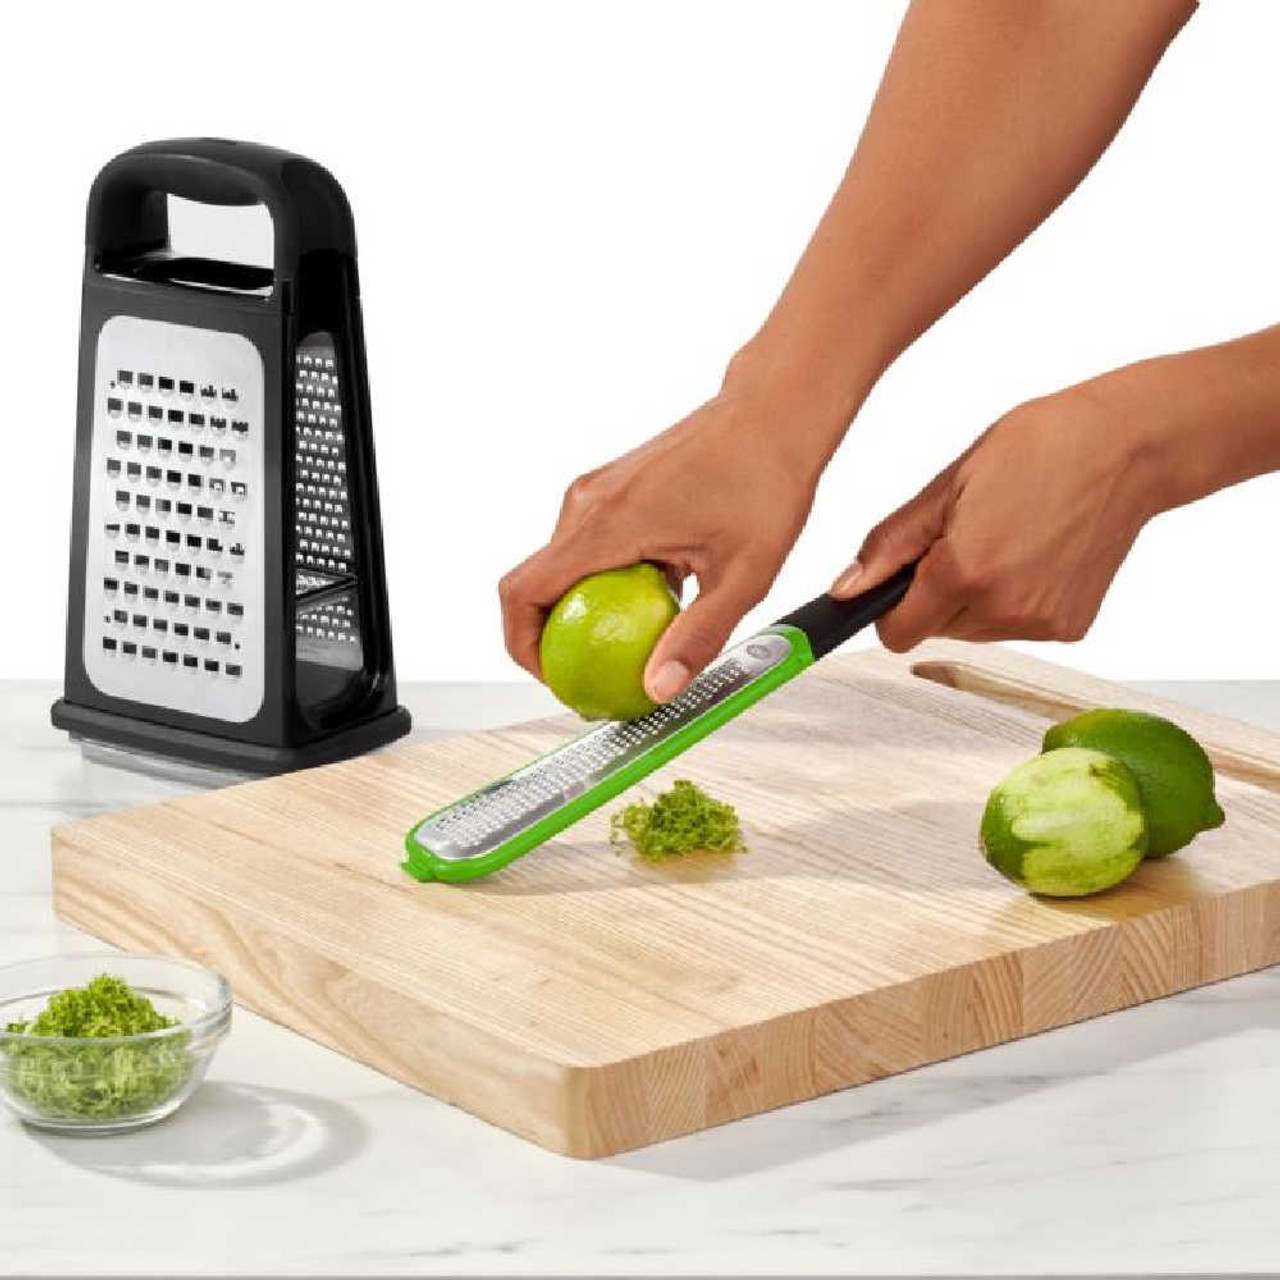 https://cdn11.bigcommerce.com/s-hccytny0od/images/stencil/1280x1280/products/4684/19027/_OXO_Good_Grips_Etched_Box_Grater_With_Removable_Zester_2__20817.1651502772.jpg?c=2?imbypass=on